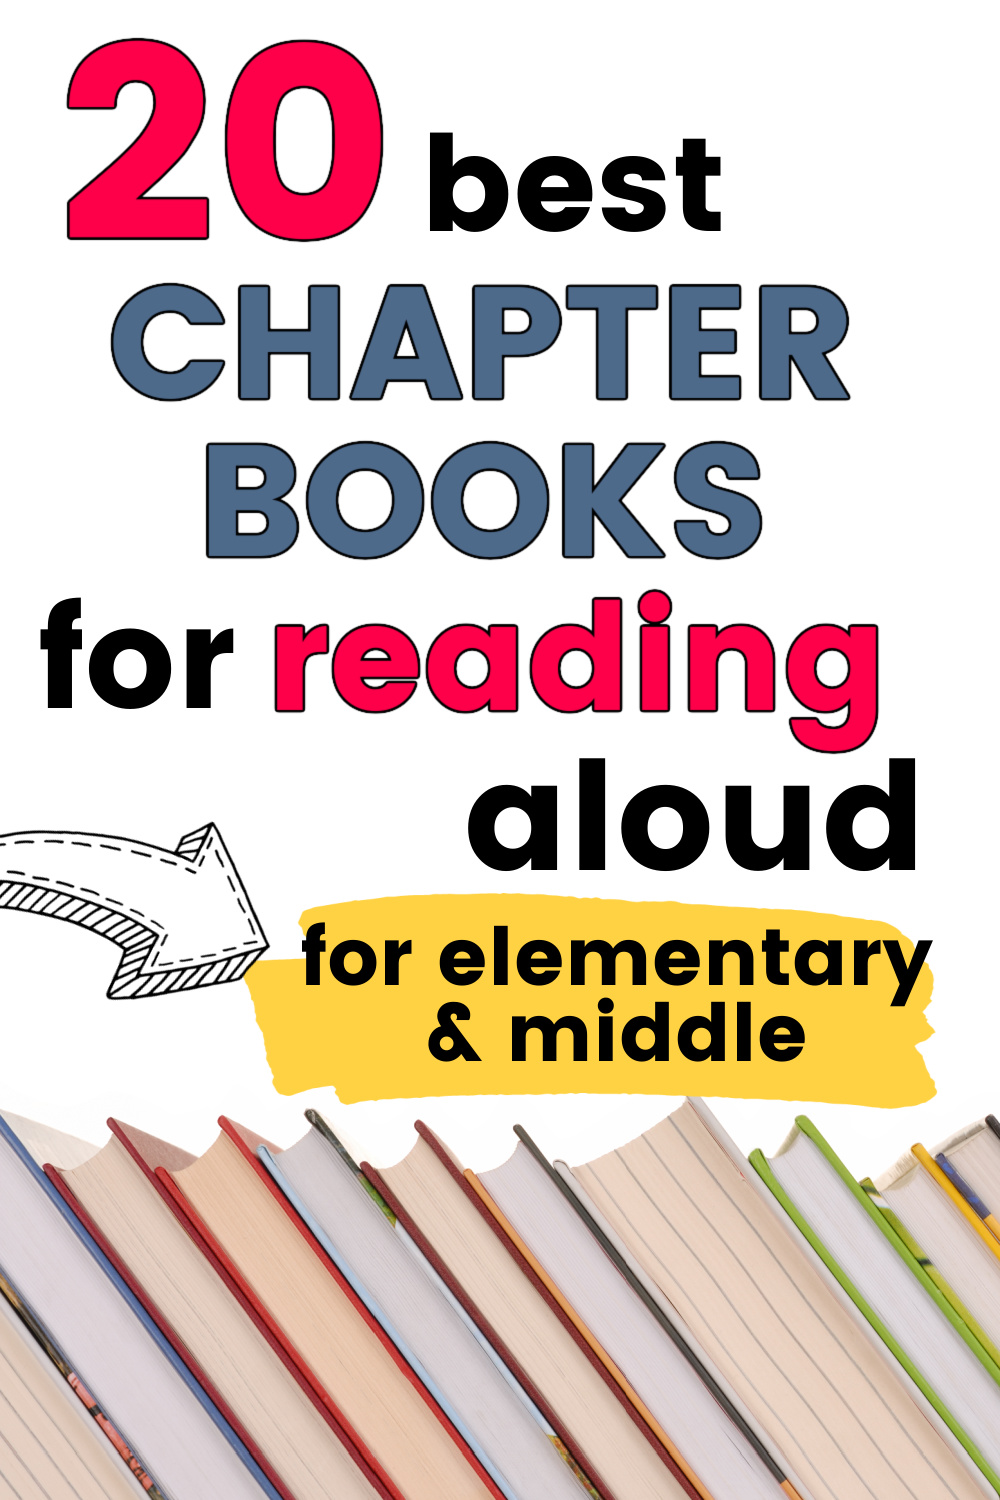 books stacked but tilted sideways, with text overlay, "20 best chapter books for reading aloud for elementary and middle"